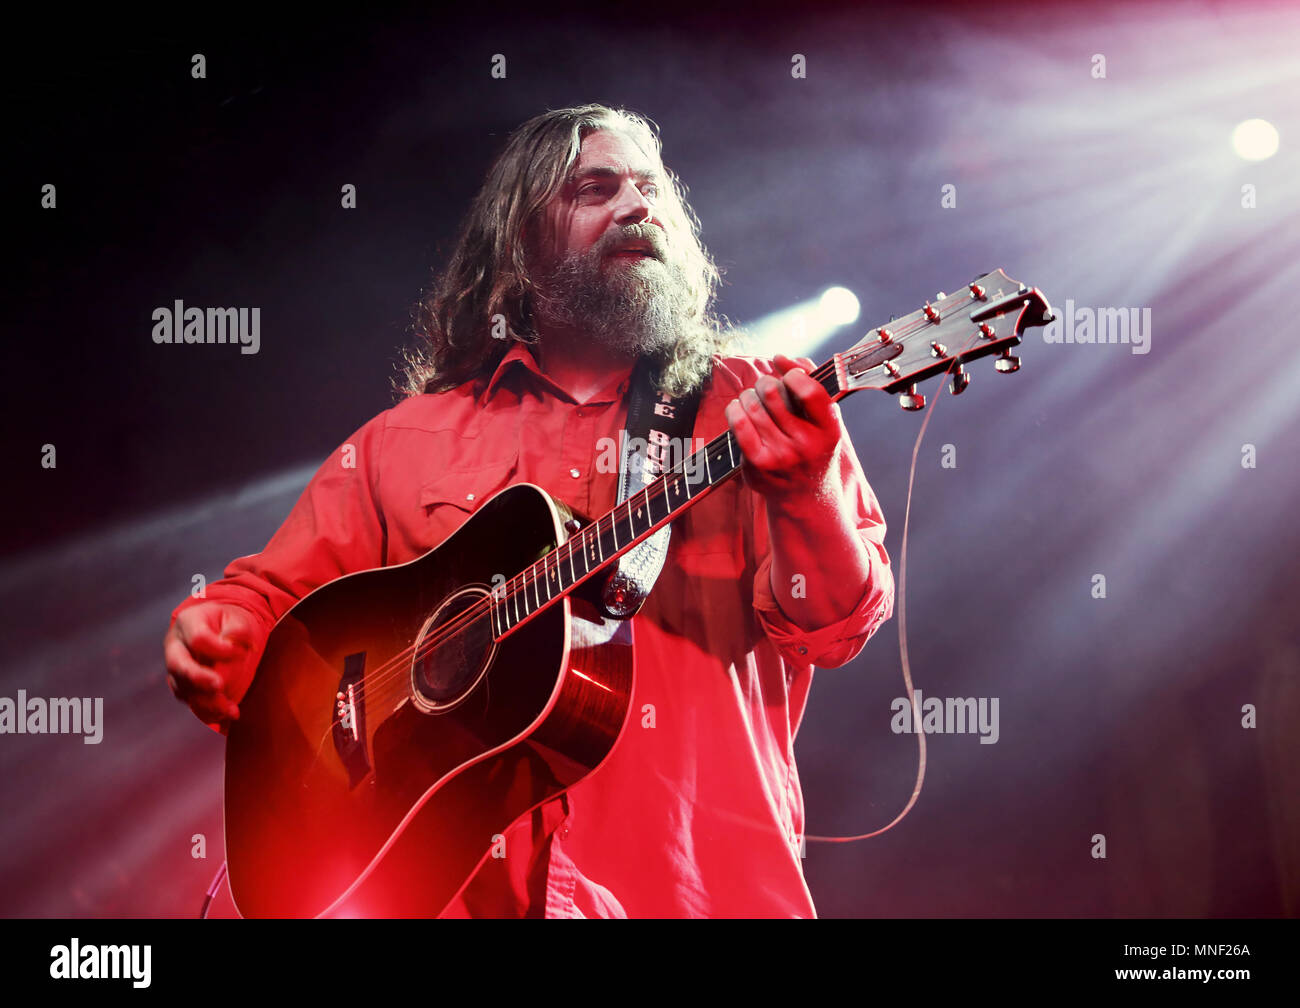 The White Buffalo performing live in concert at Manchester O2 Ritz  Featuring: The White Buffalo, Jake Smith Where: Manchester, United Kingdom  When: 15 Apr 2018 Credit: Sakura/WENN.com Stock Photo - Alamy